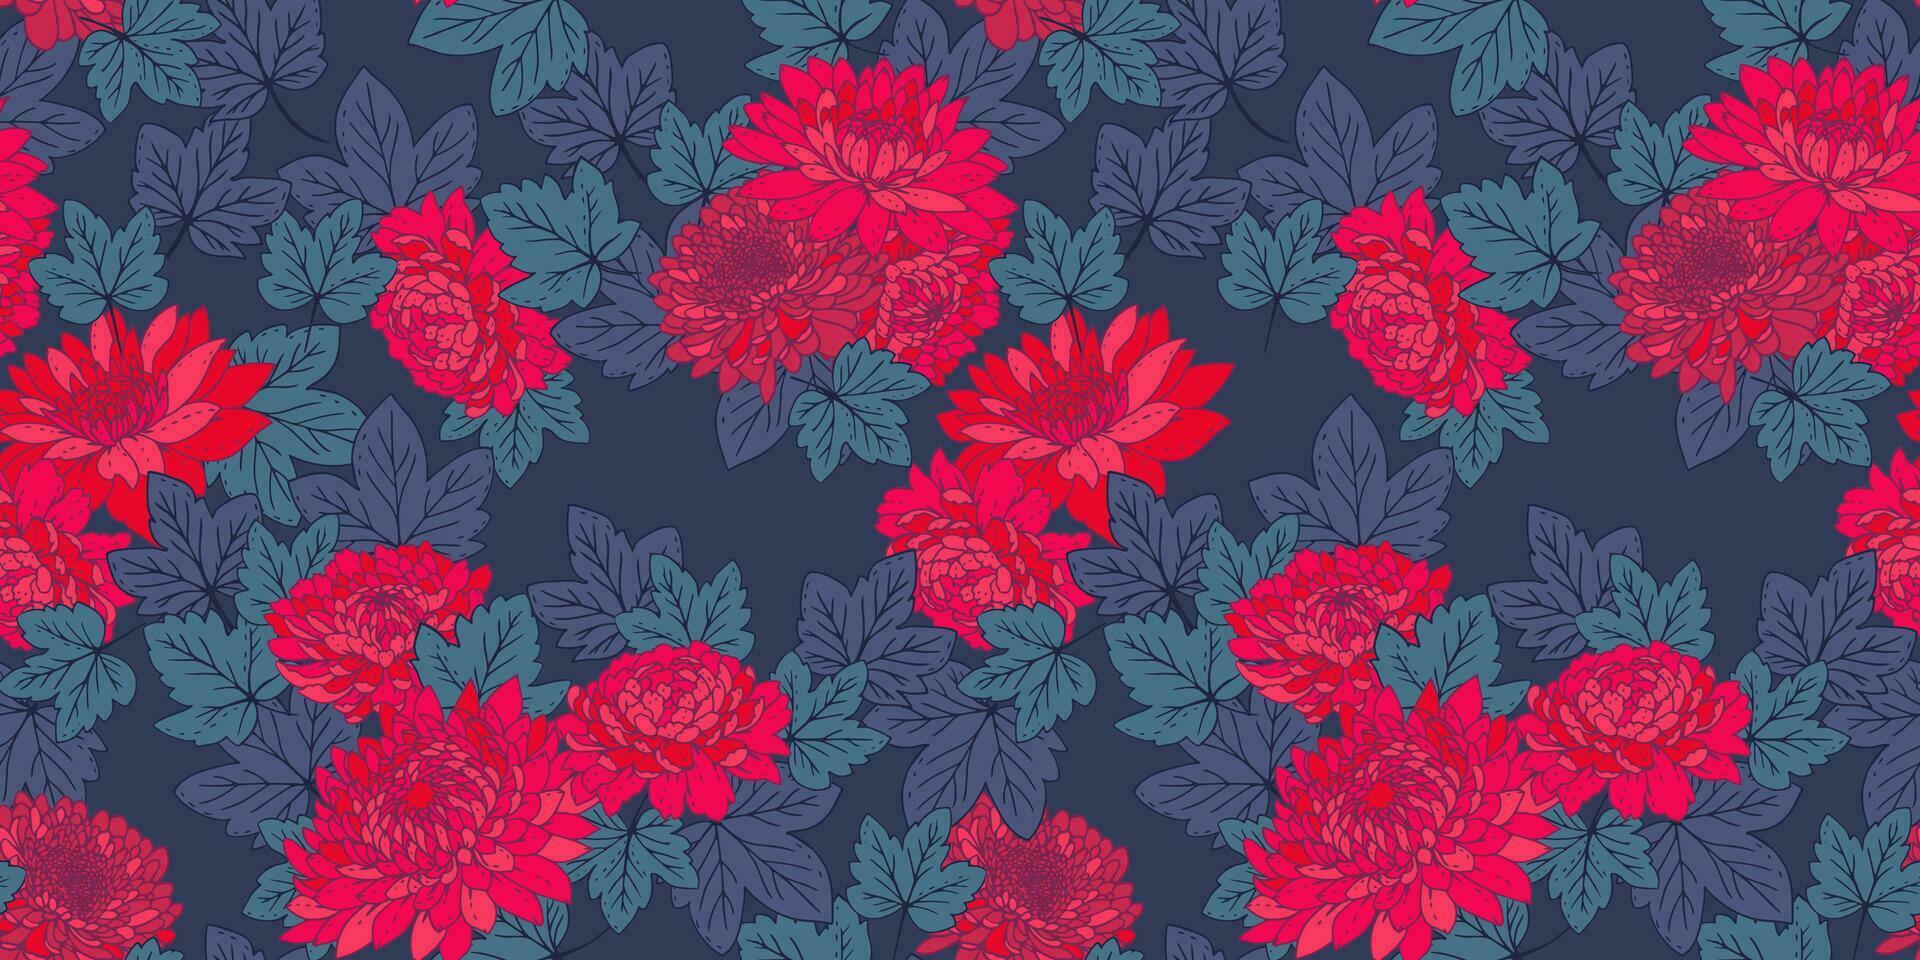 Artistic abstract flowers and leaves seamless pattern. Vector hand drawn. Blooming red floral and leaf on a dark blue background. Stylized botanical illustration printing. Design for fashion, textile